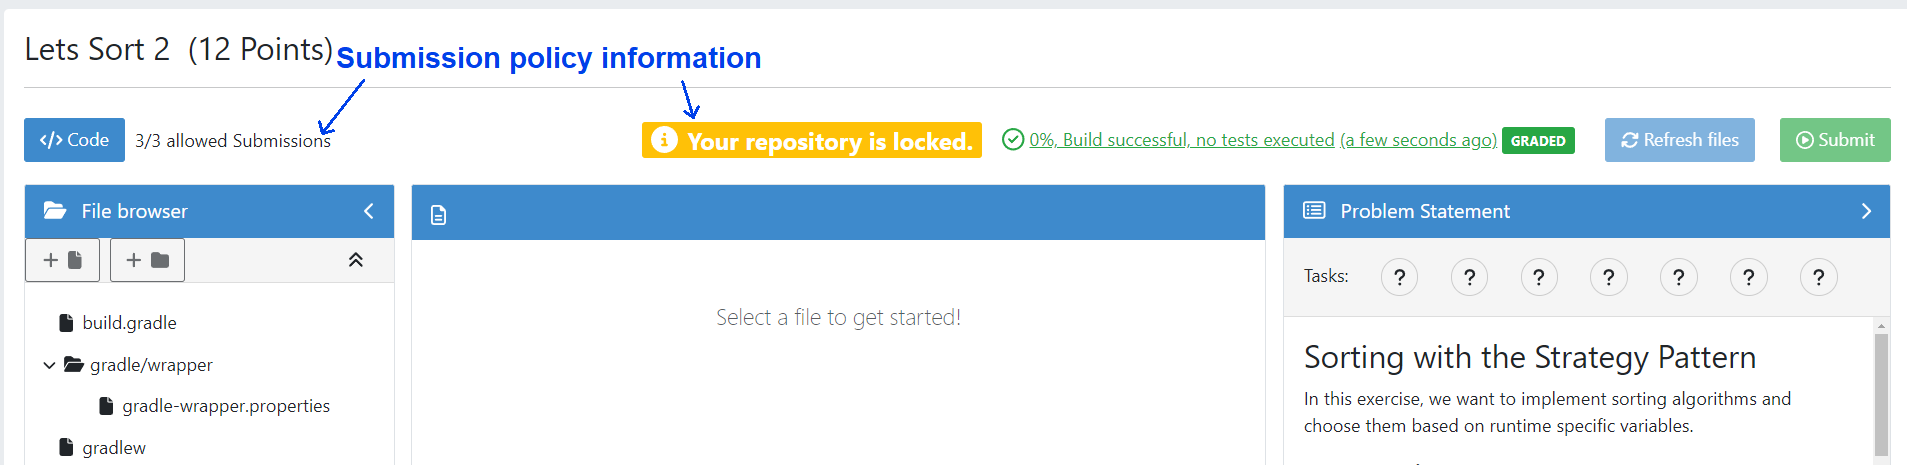 Effect of the Lock Repository Policy